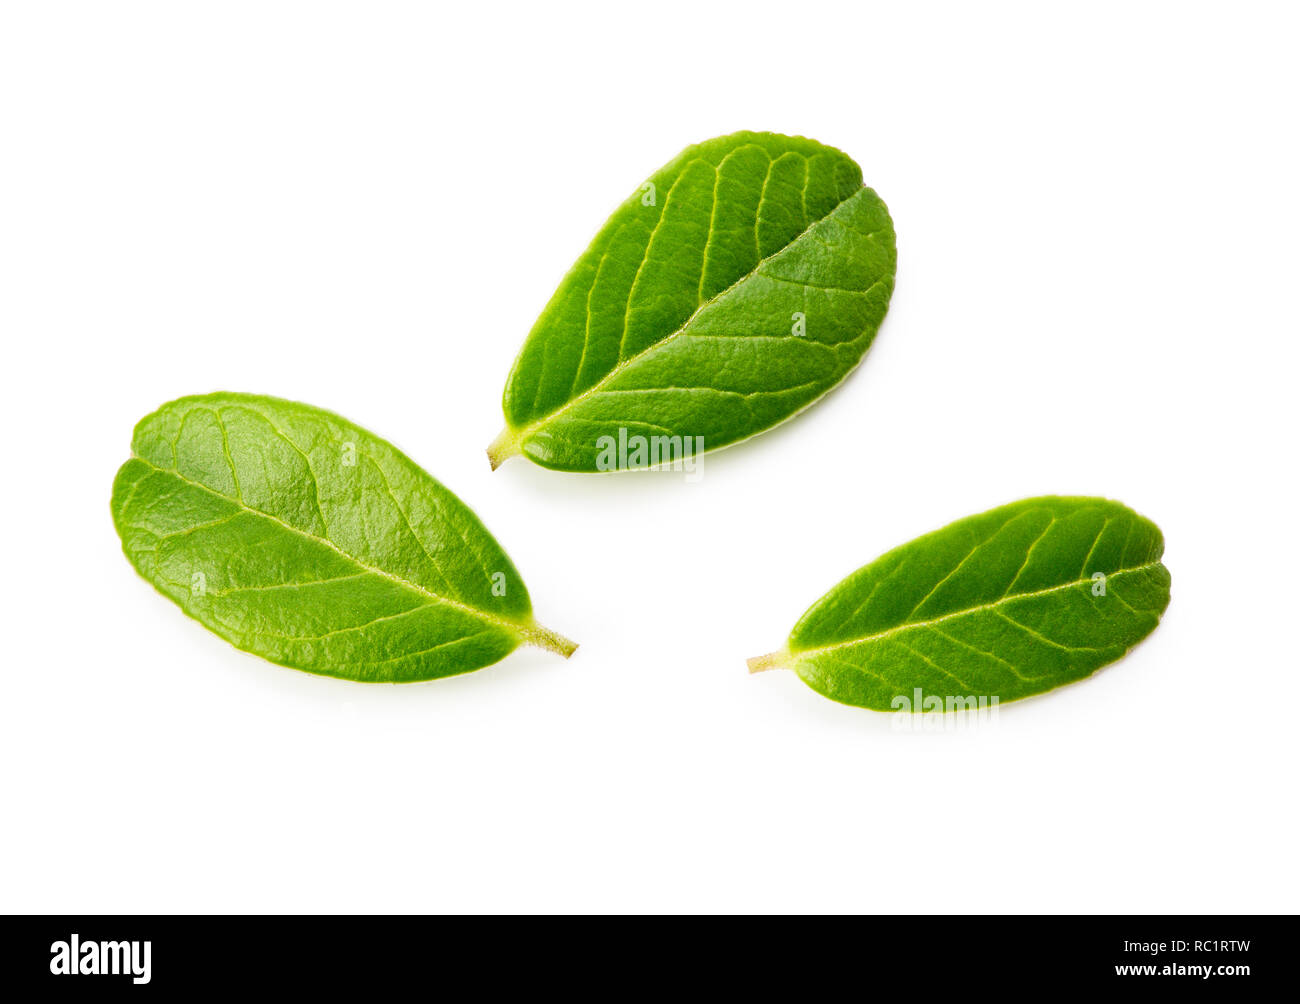 Blueberries or lingonberries green leaves. Fresh leaf of blueberry isolated on white background. Stock Photo